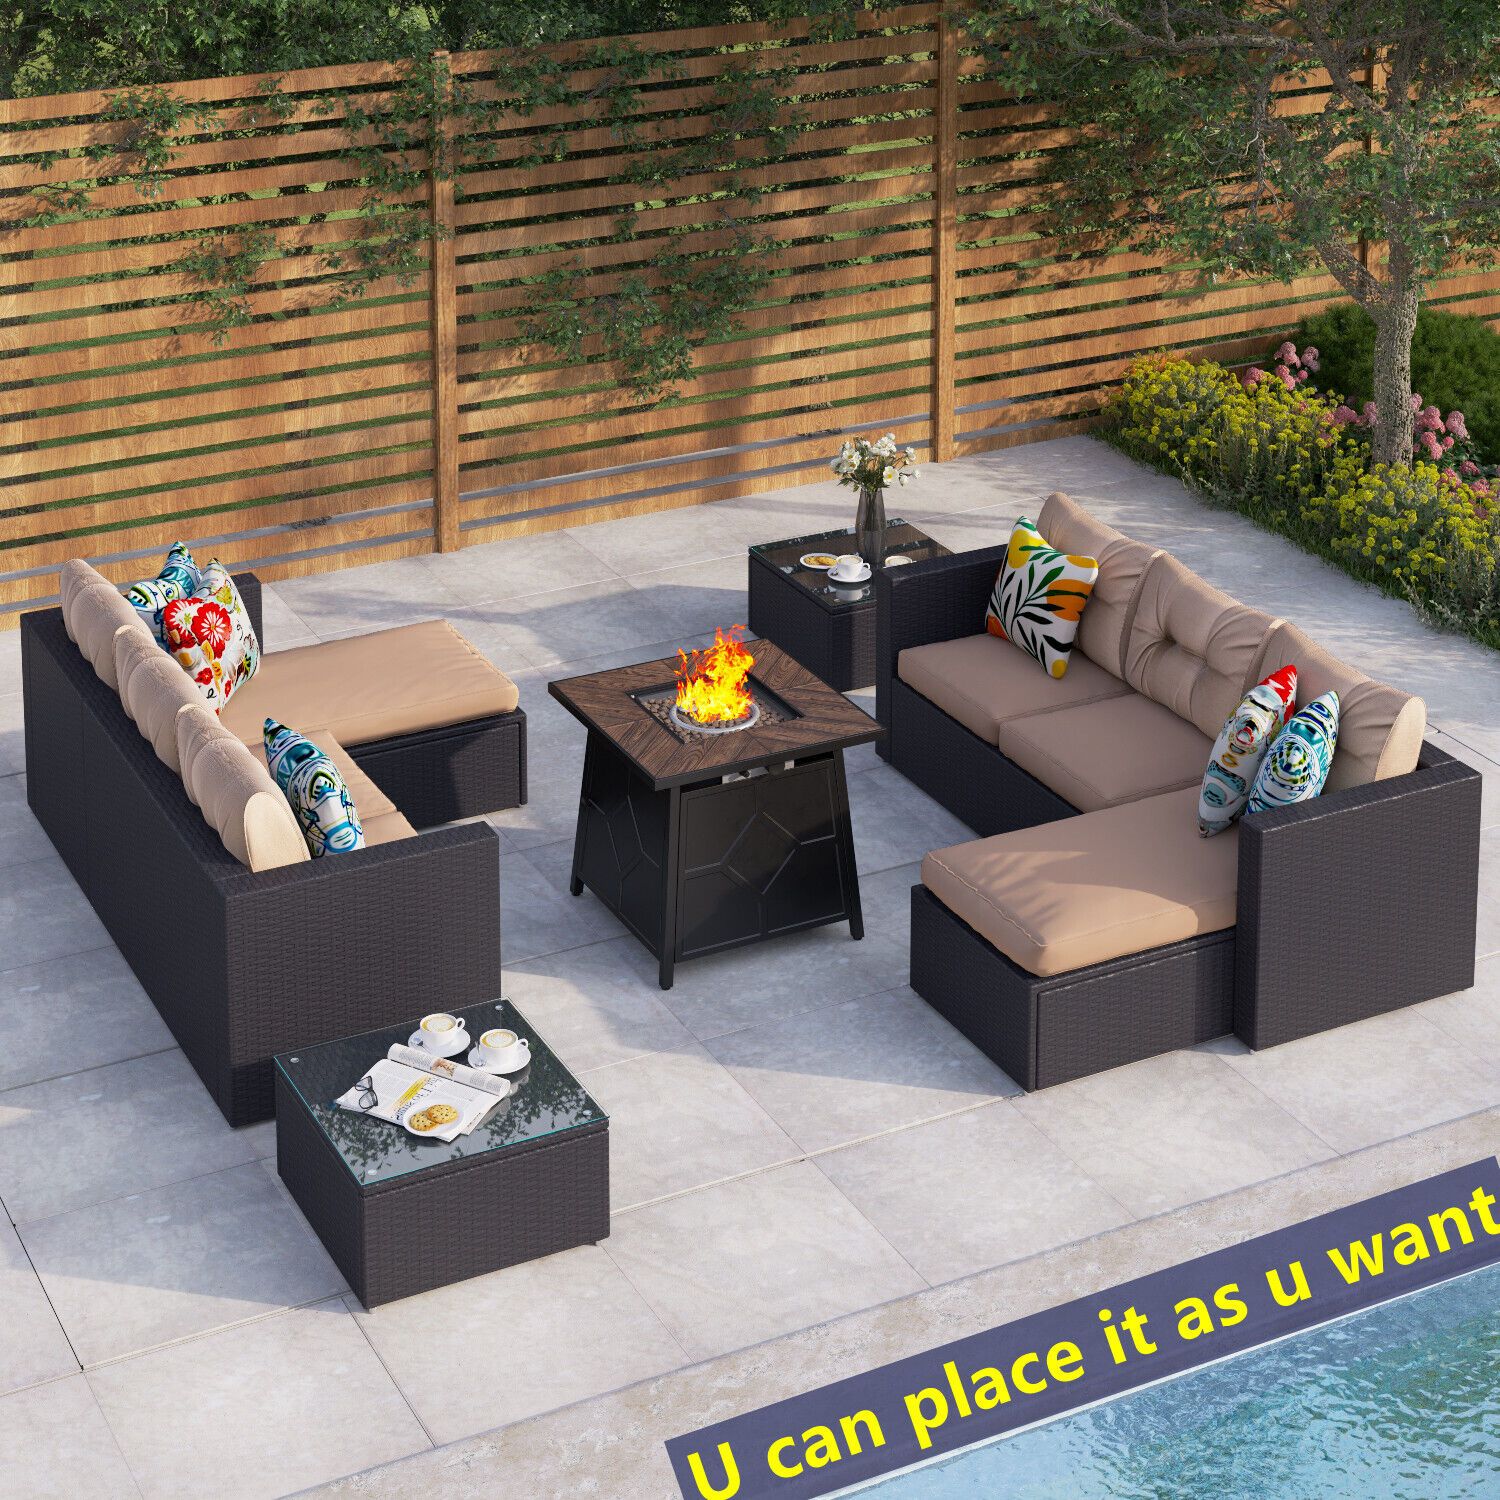 Outdoor Rattan Sectional Sofa Set With Gas Fire Pit Table Patio Wicker  Furniture 670724078205 | Ebay Regarding Fire Pit Table Wicker Sectional Sofa Set (View 6 of 15)